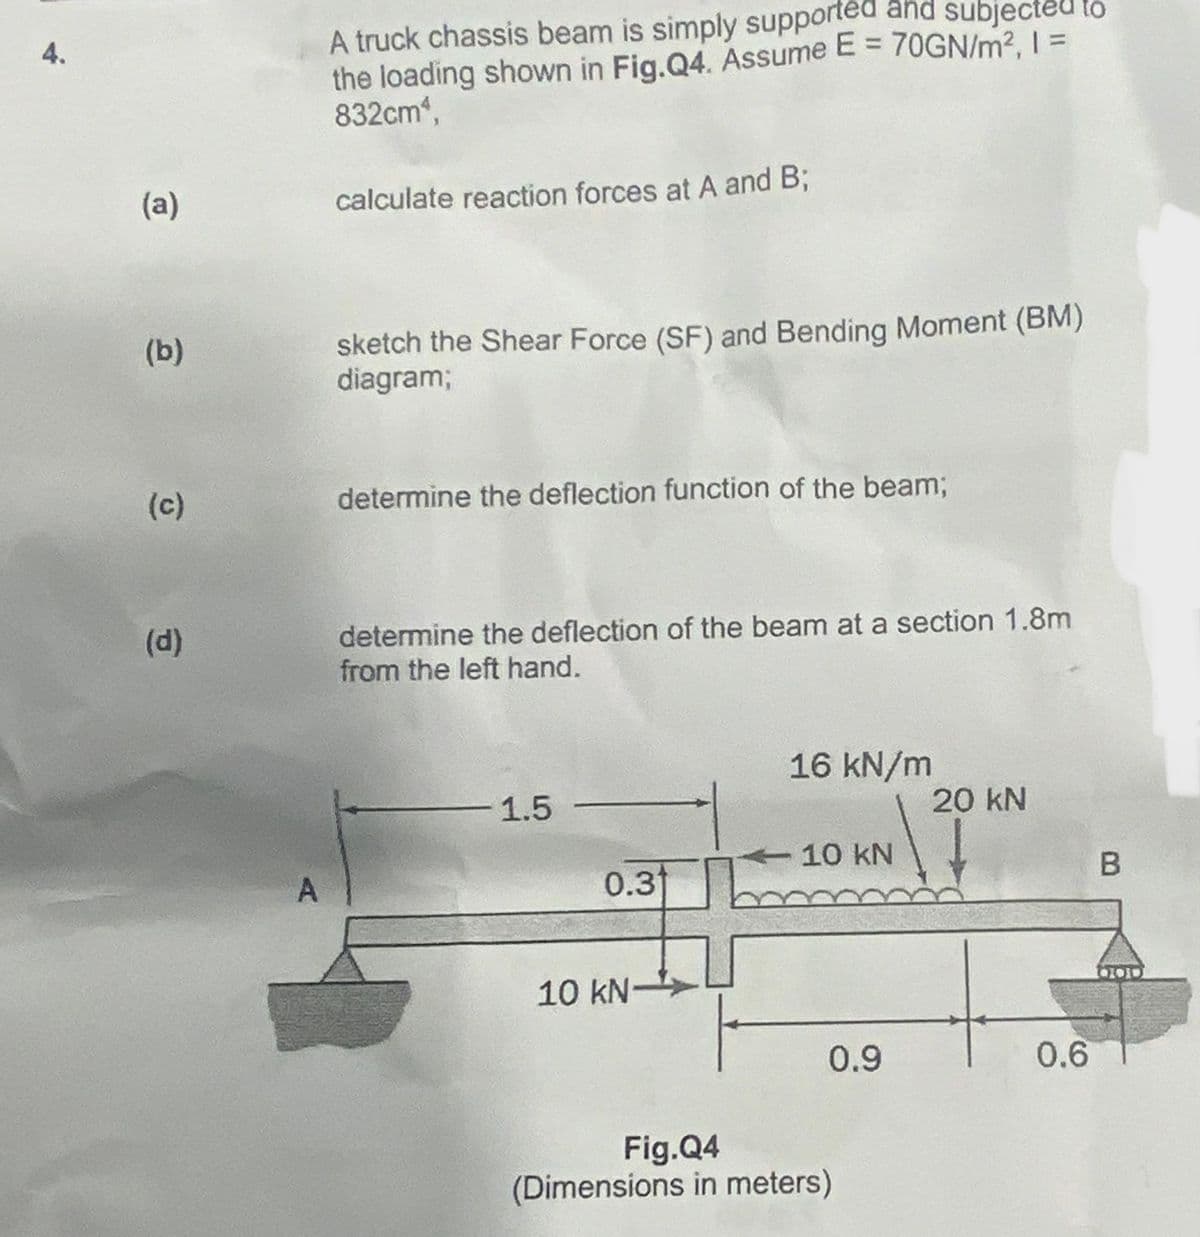 4.
(a)
(b)
(c)
(d)
A
A truck chassis beam is simply supported and subjected to
the loading shown in Fig.Q4. Assume E = 70GN/m², 1 =
832cm,
calculate reaction forces at A and B;
sketch the Shear Force (SF) and Bending Moment (BM)
diagram;
determine the deflection function of the beam;
determine the deflection of the beam at a section 1.8m
from the left hand.
1.5
0.31
10 kN-
16 kN/m
-10 kN
0.9
Fig.Q4
(Dimensions in meters)
20 kN
0.6
B
100